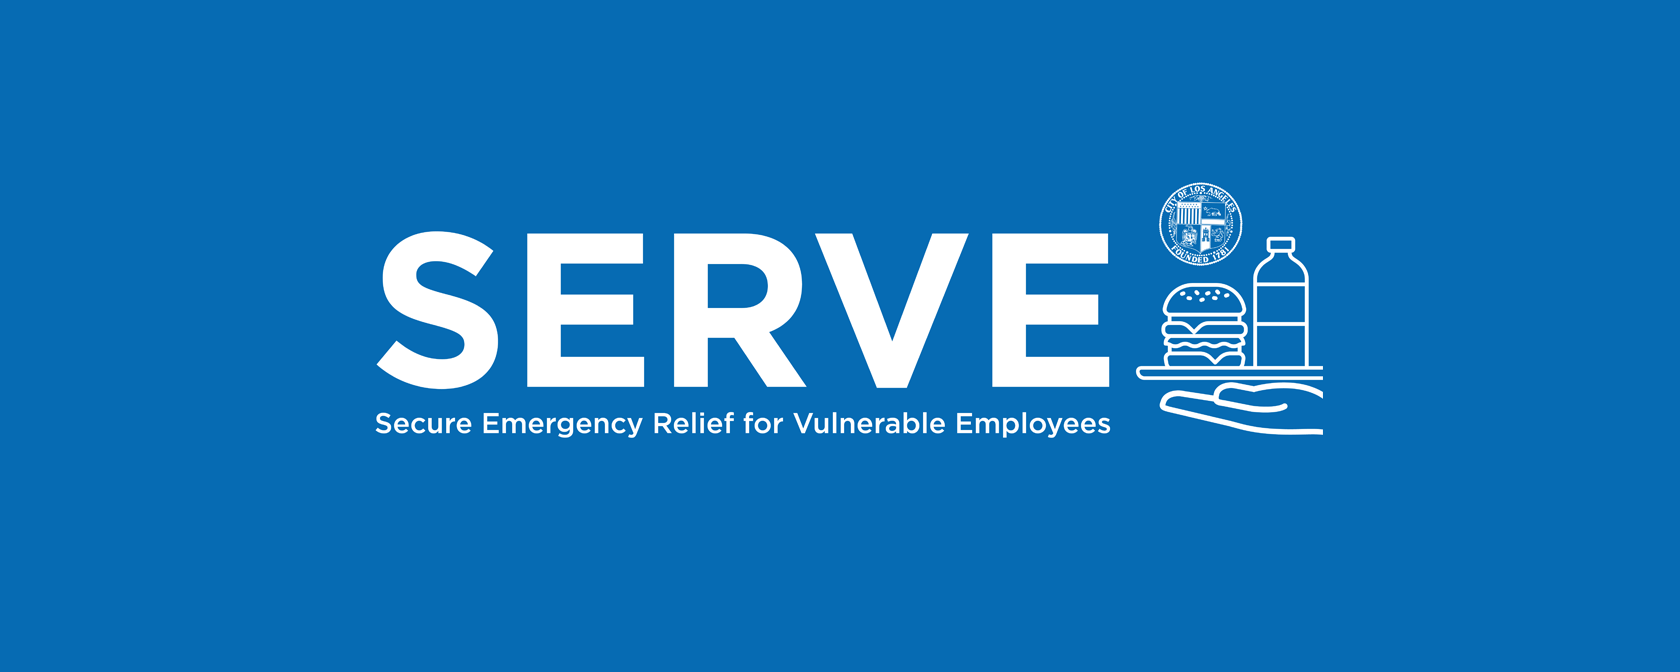 SERVE: Secure Emergency Relief for Vulnerable Employees